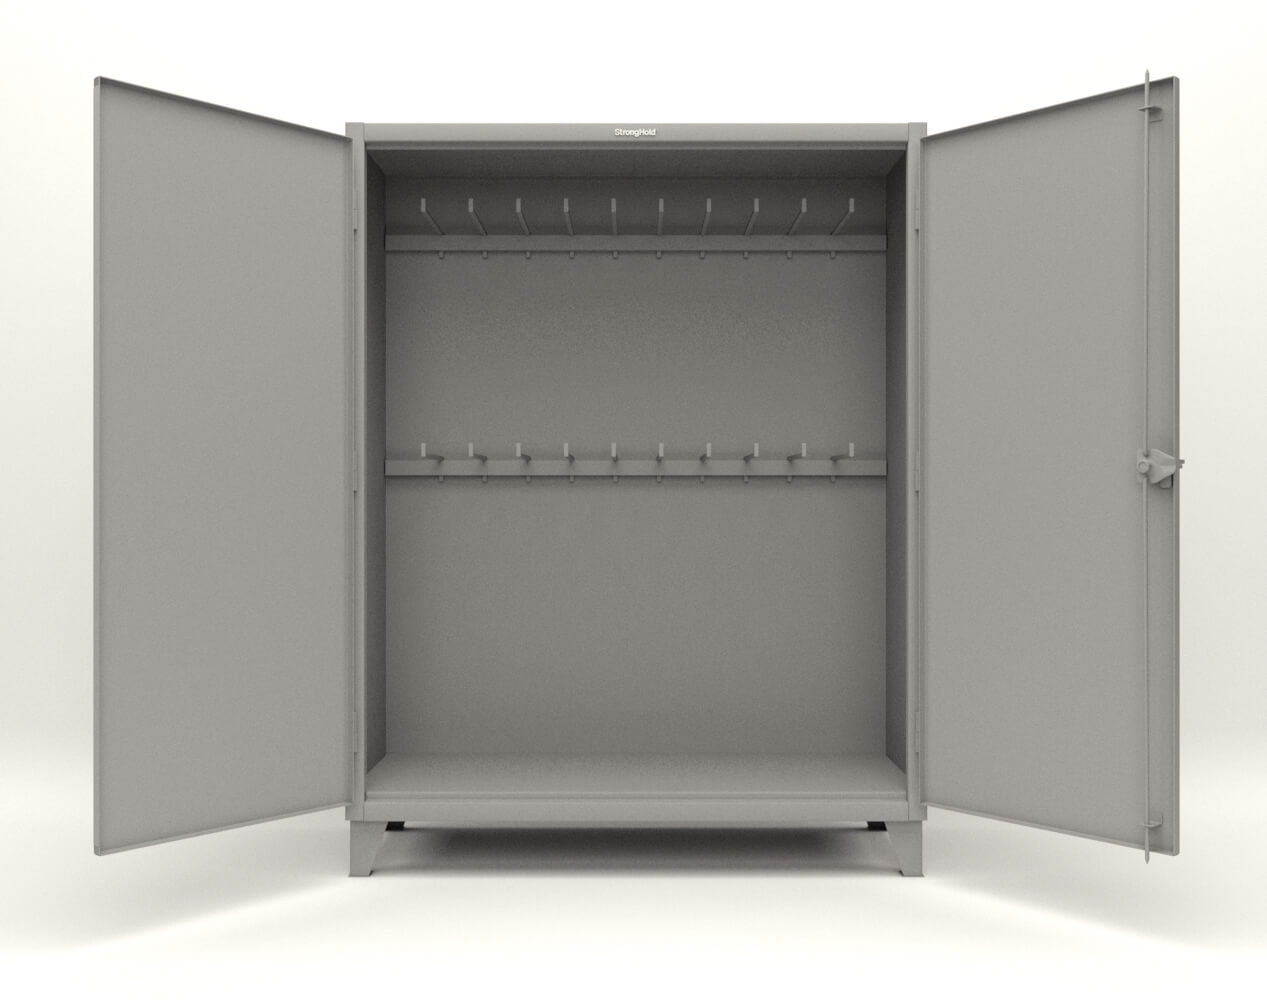 Extreme Duty 12 GA Rigging Cabinet with 20 Hooks - 60 In. W x 24 In. D x 78 In. H